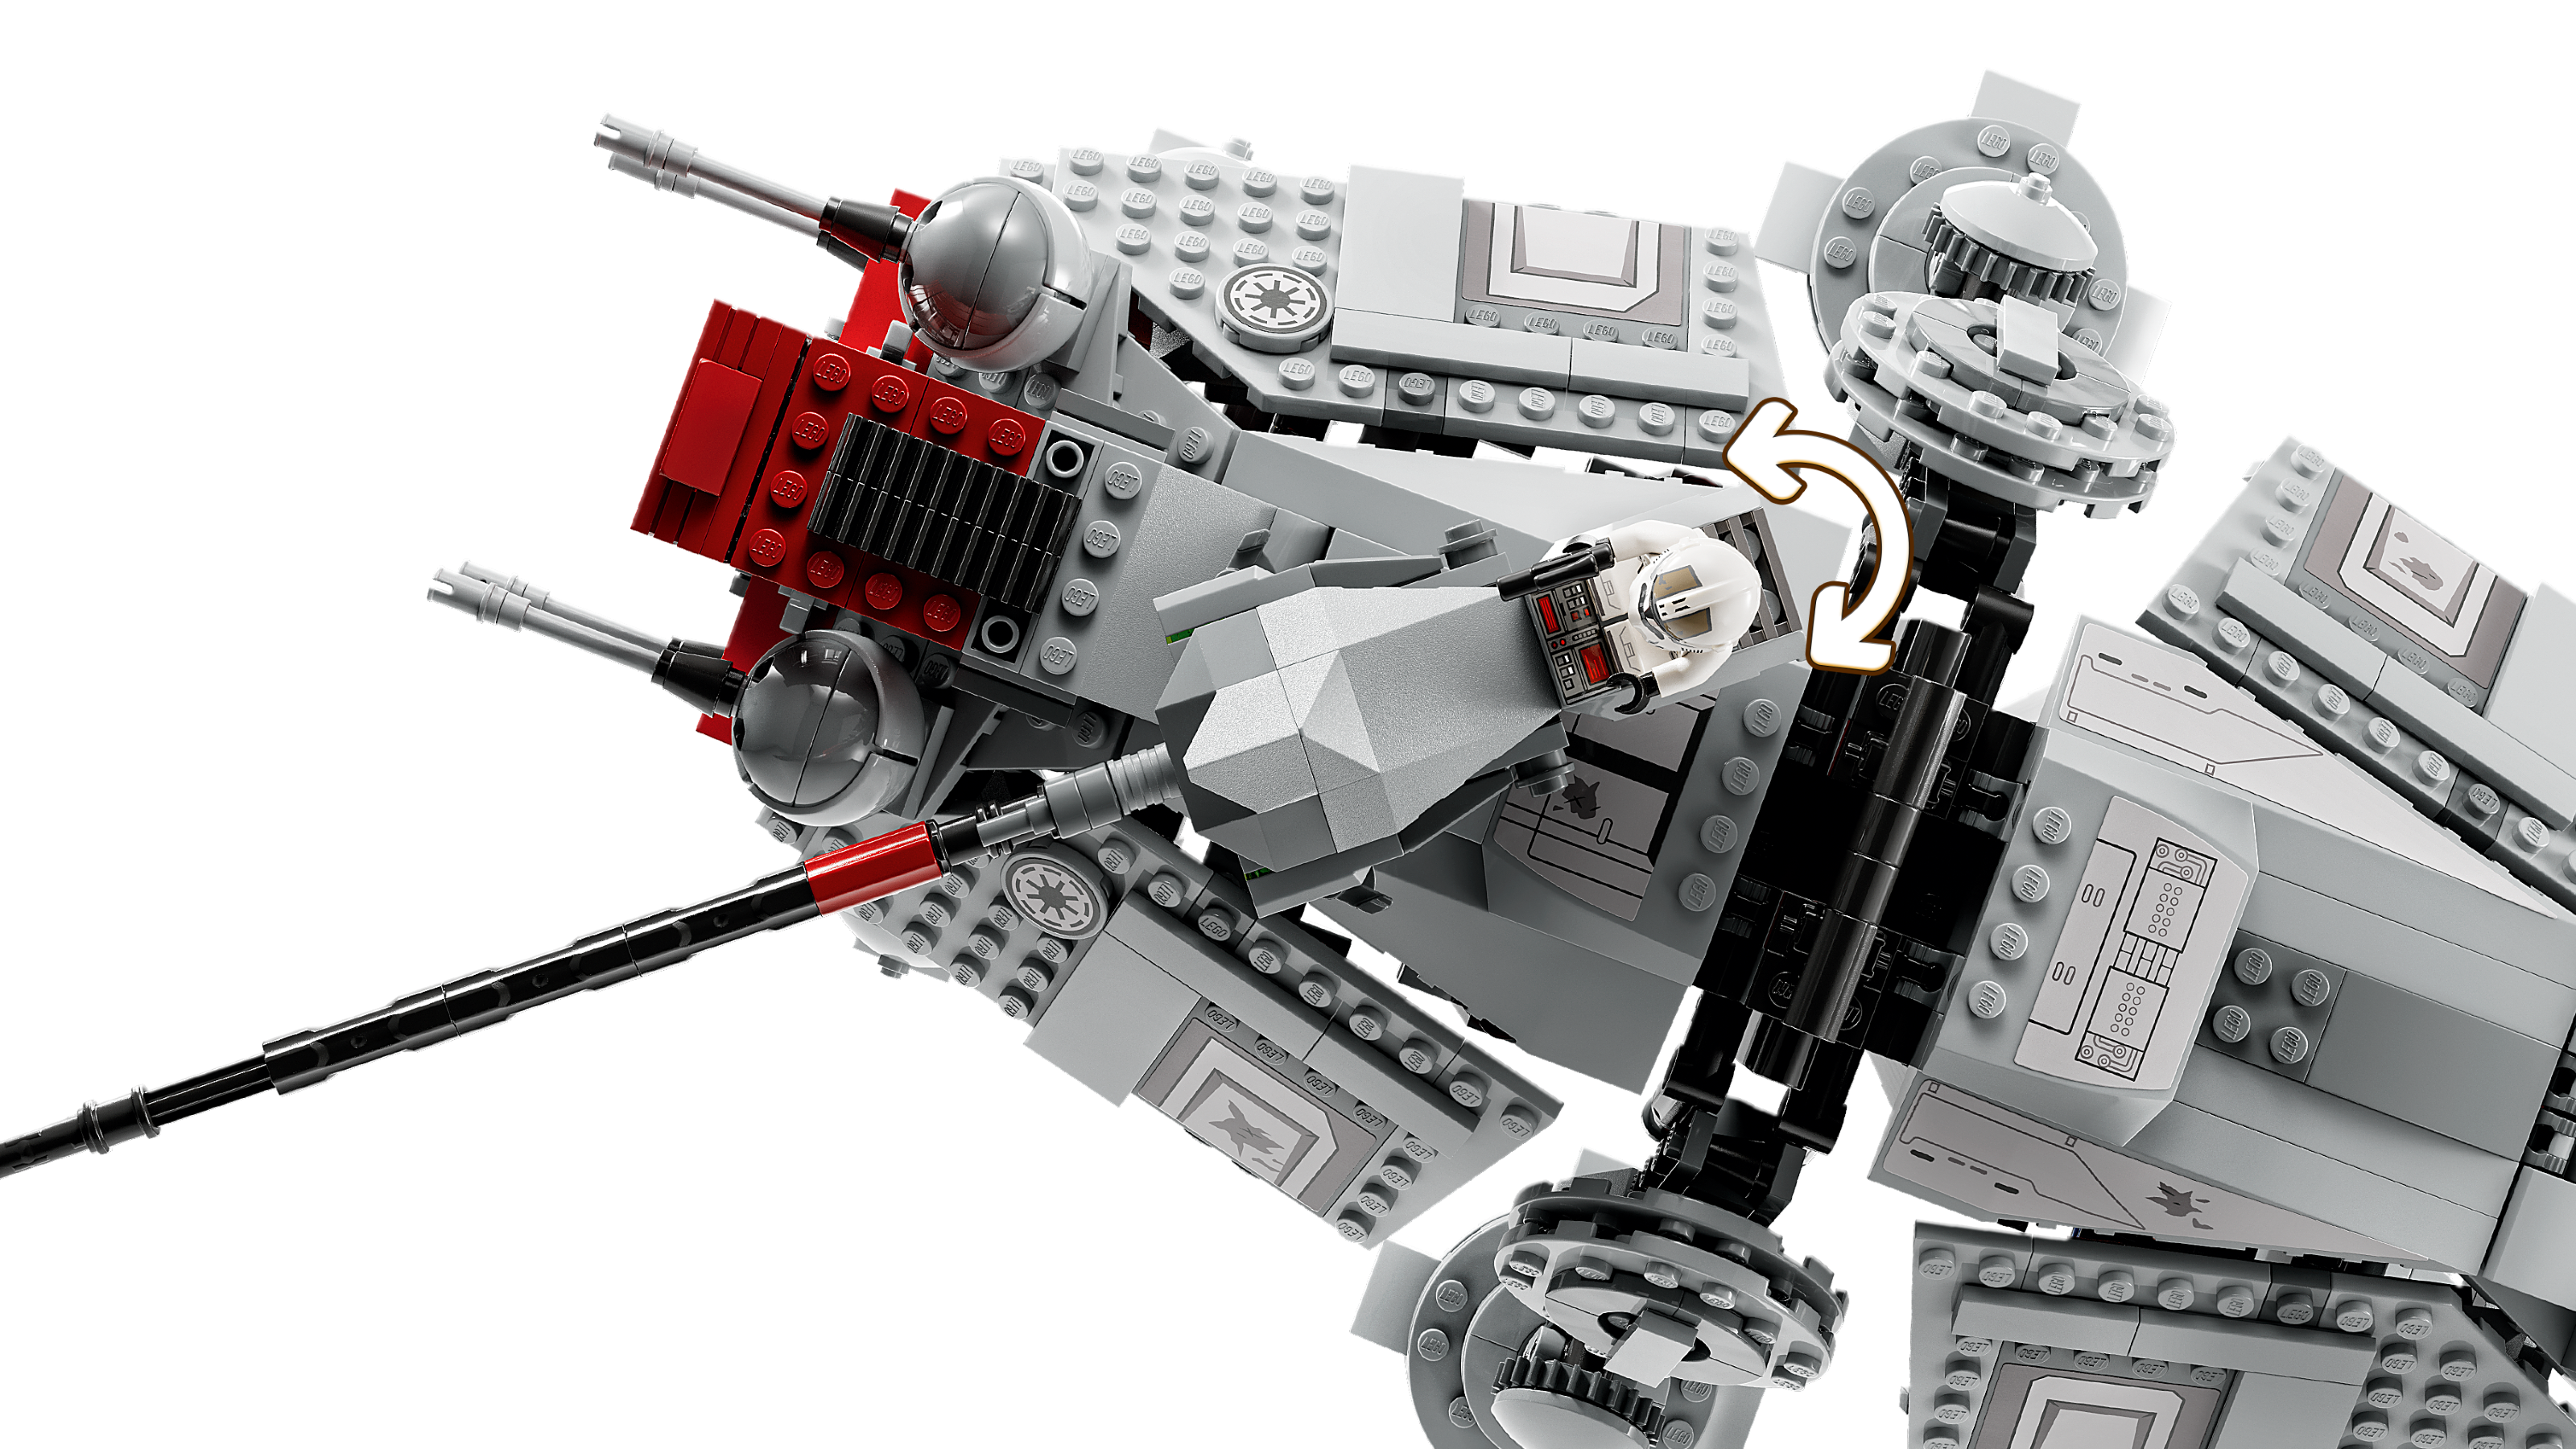 Lego Star Wars AT-TE Walker review